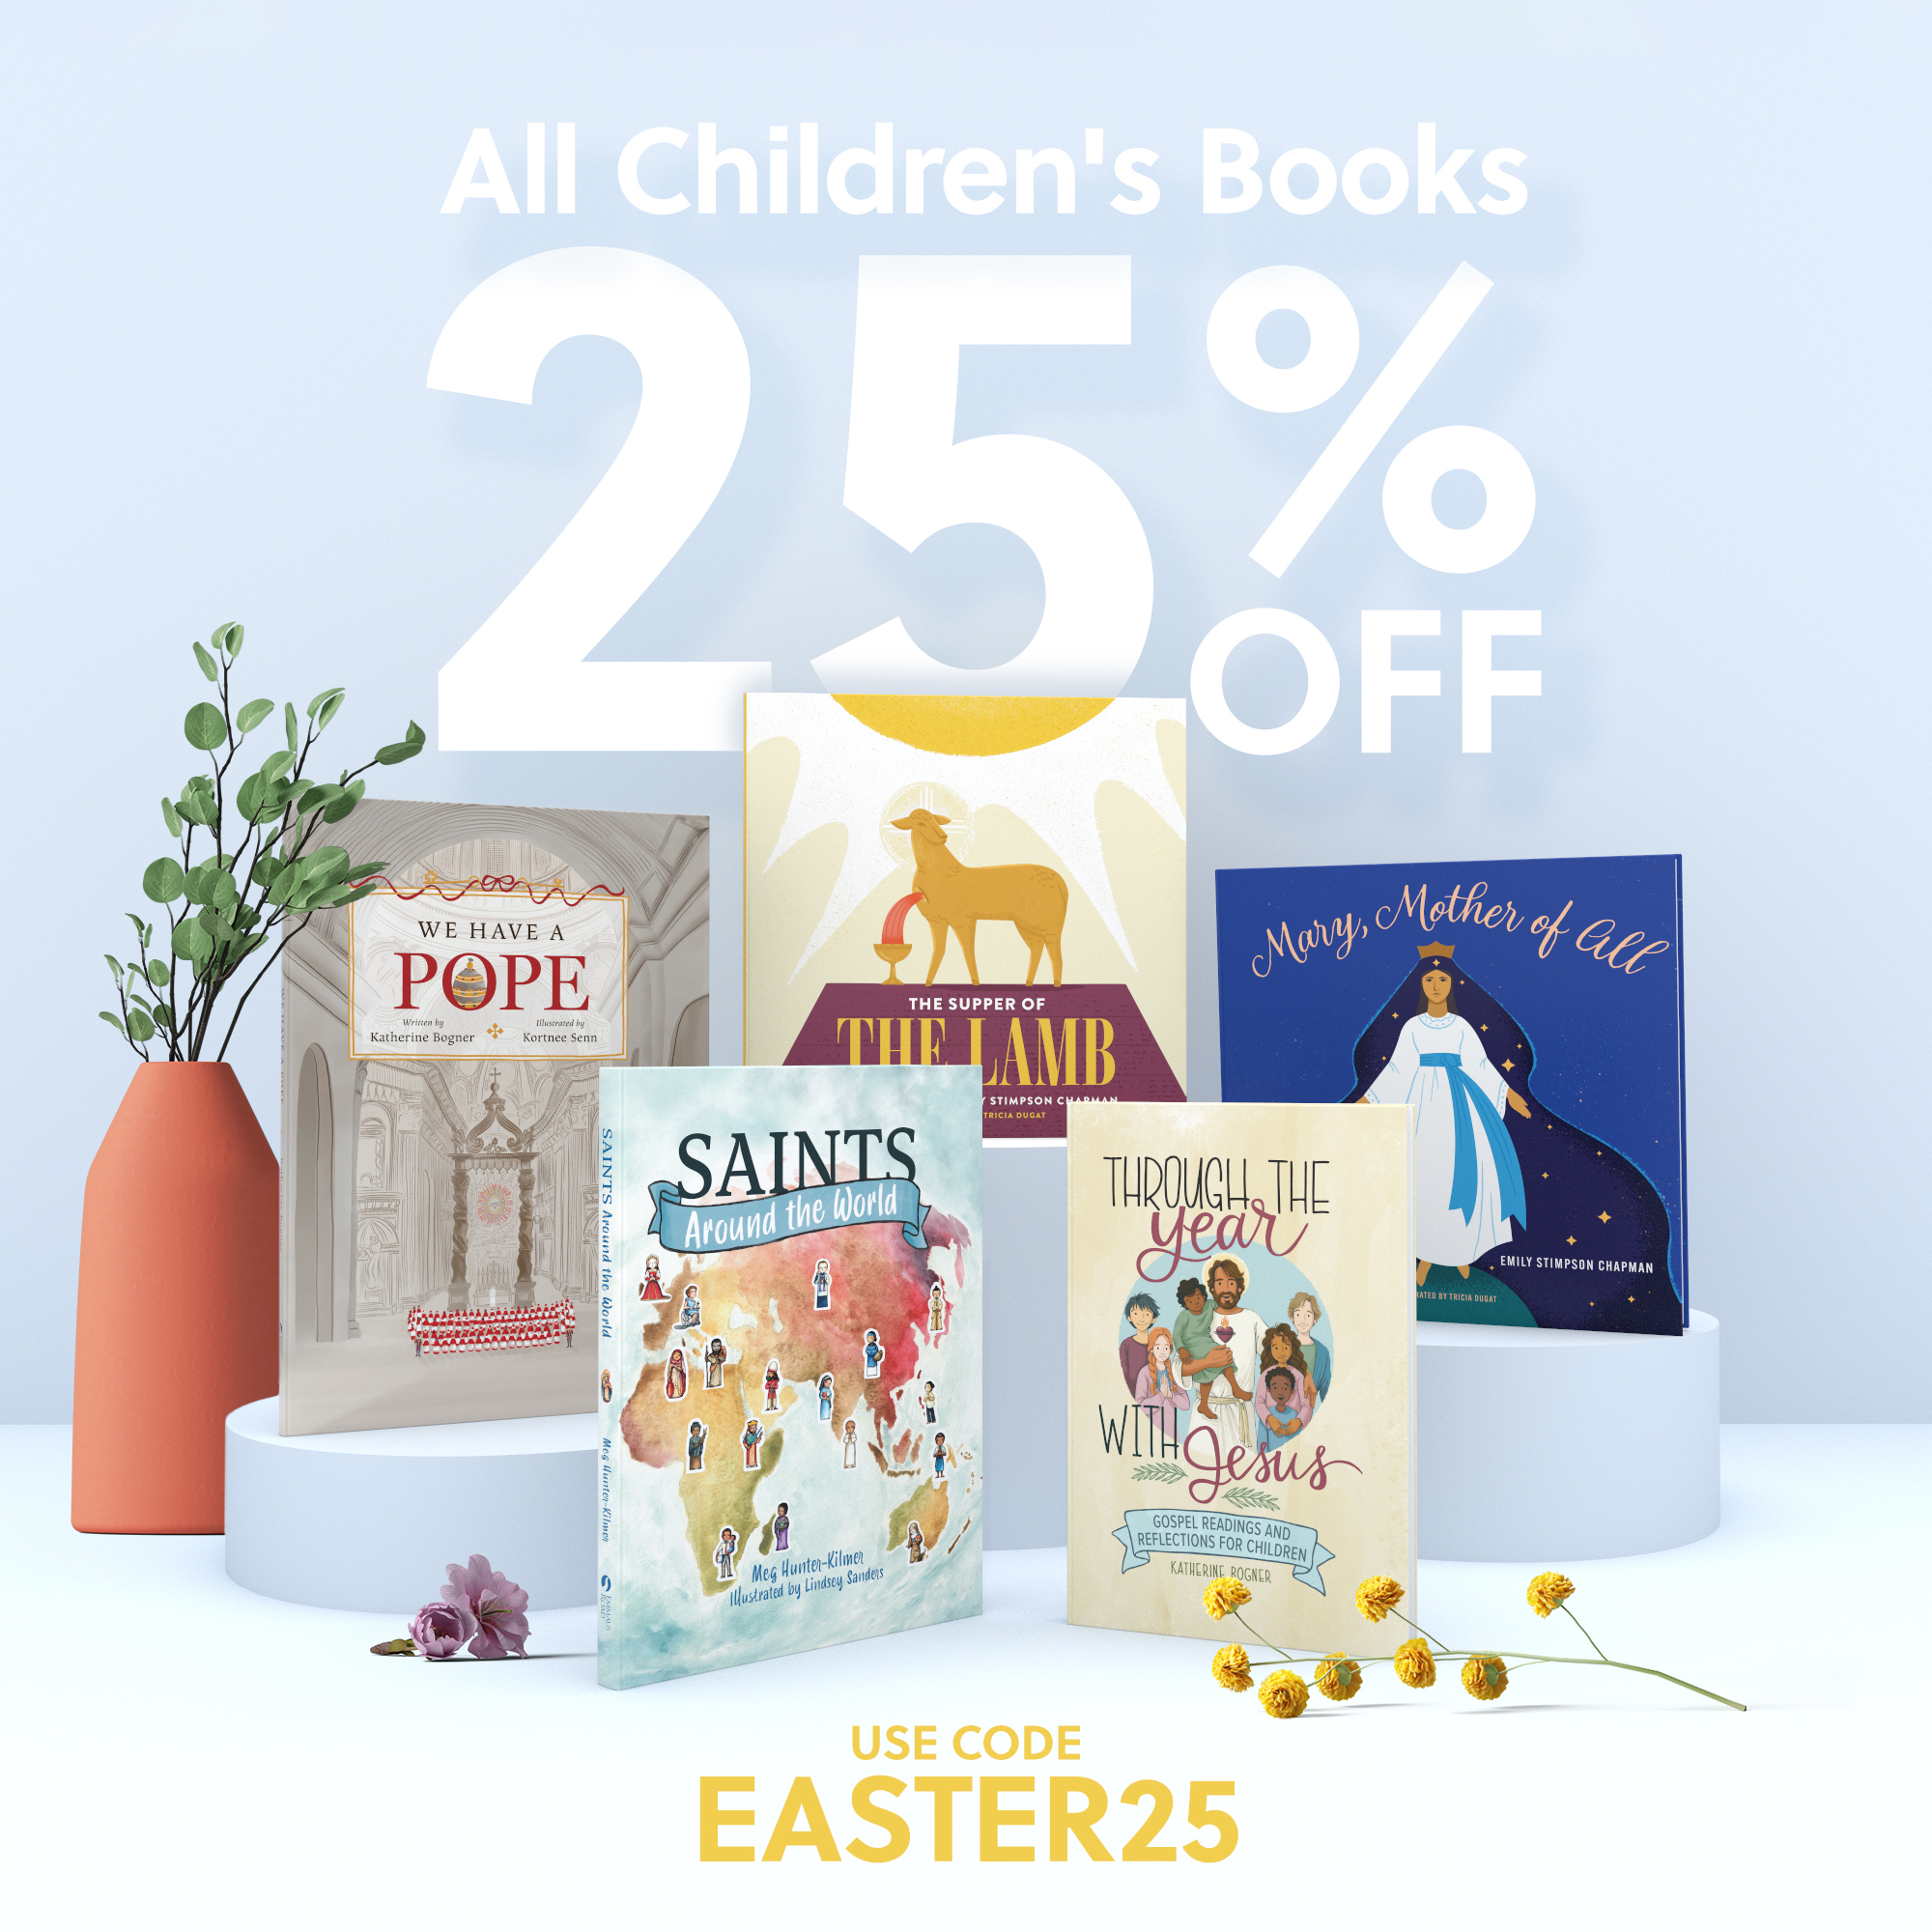 All Children's Books 25% Off. Use Code EASTER25